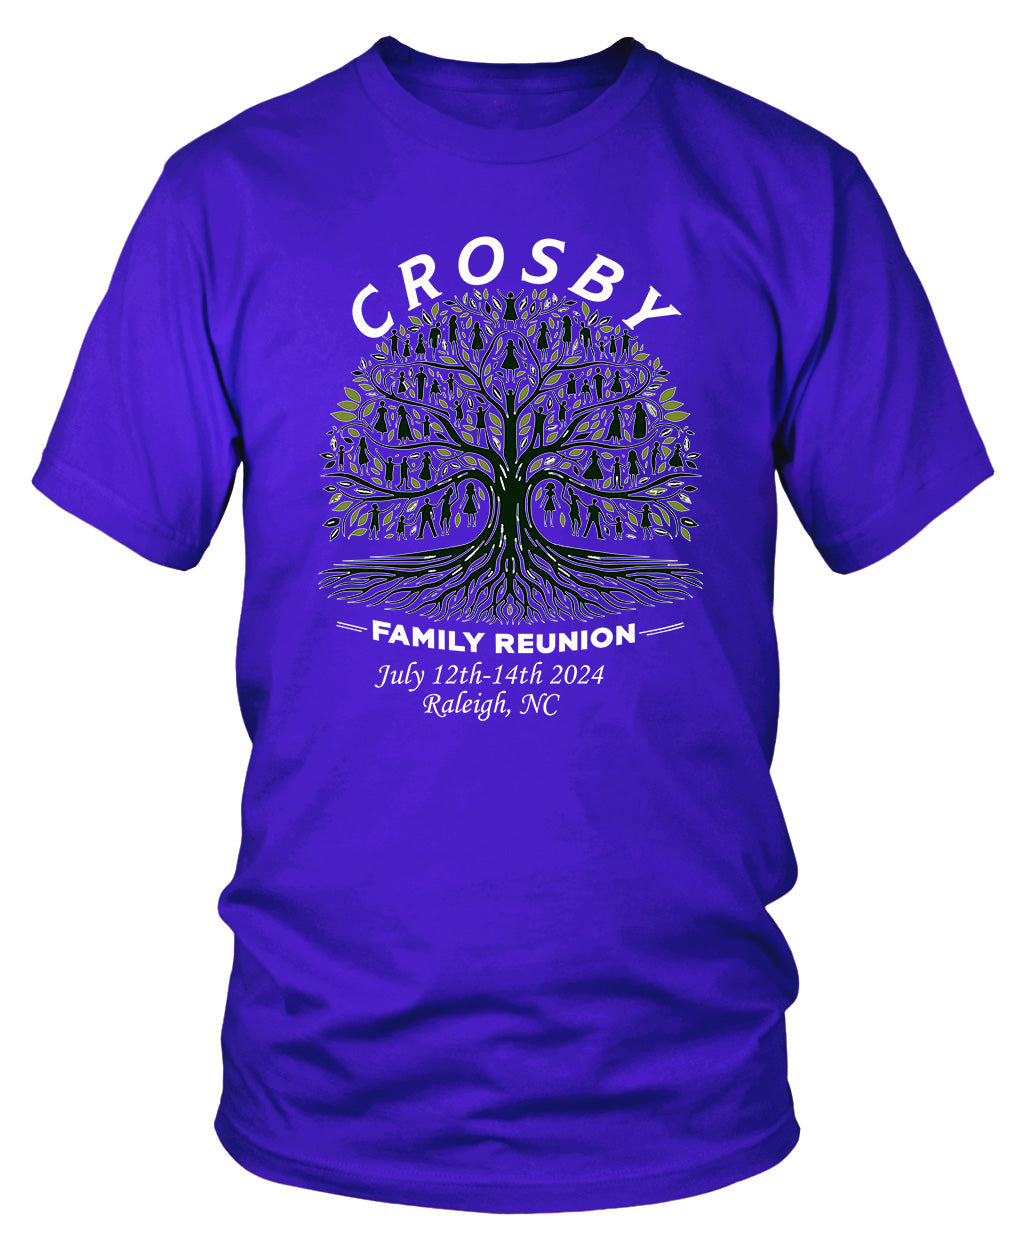 Crosby Family Reunion Adult T-Shirt